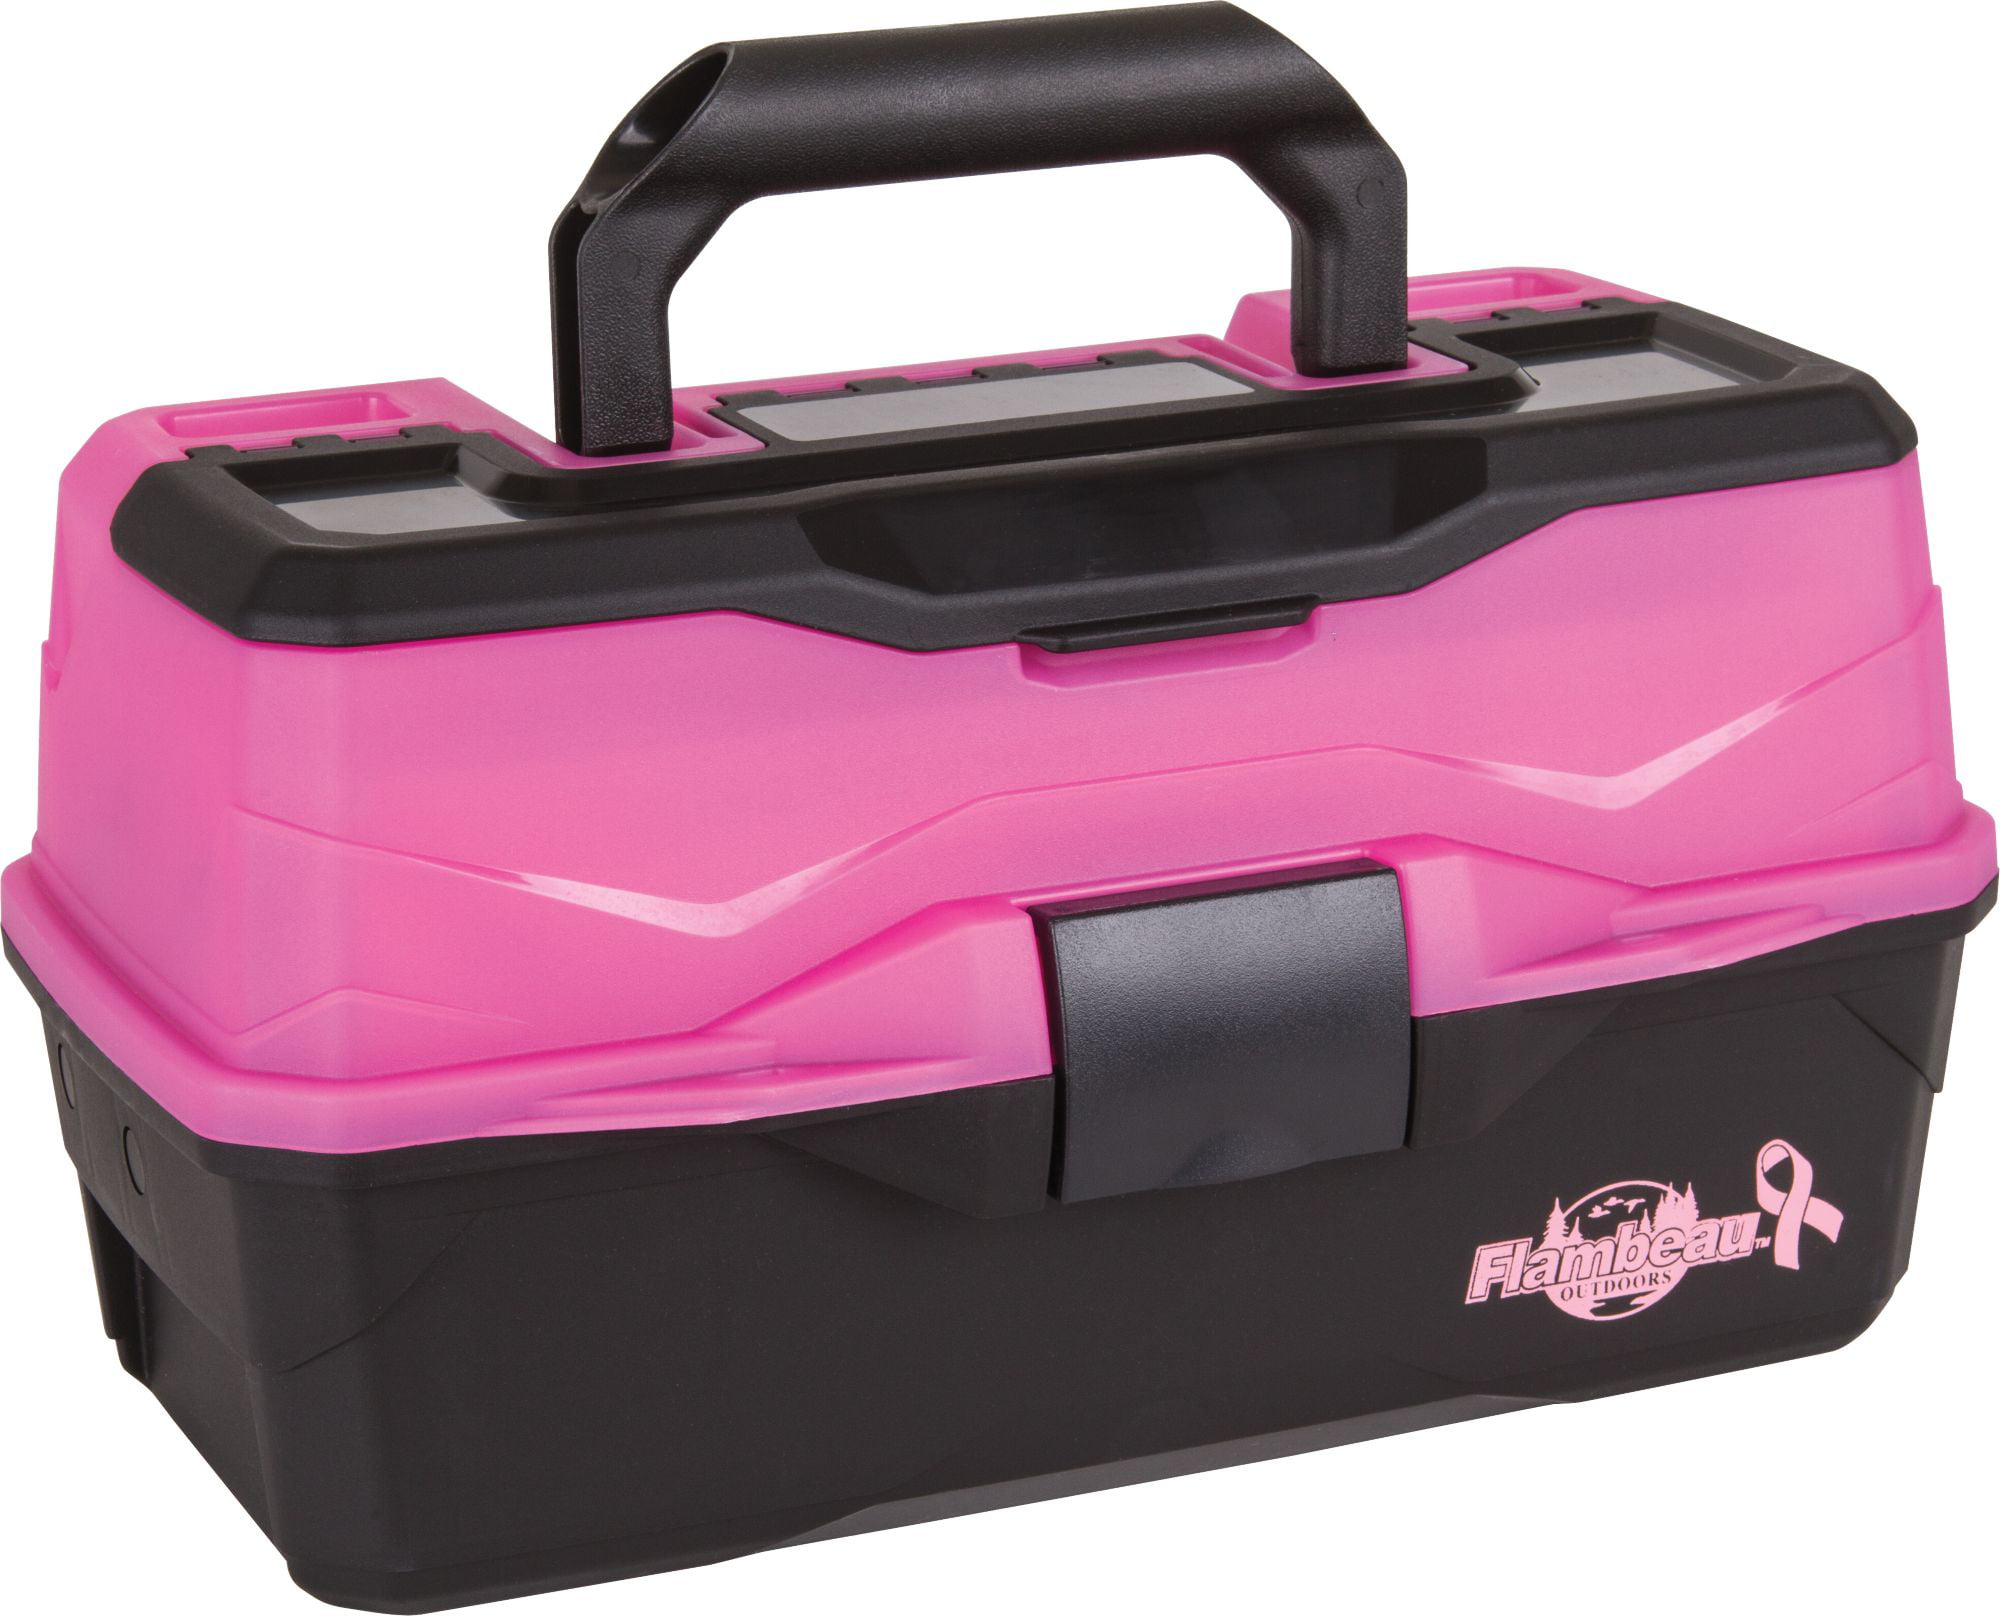 Flambeau Pink Support The Cure Tackle Box 2017 2 Tray Freshwater Fishing